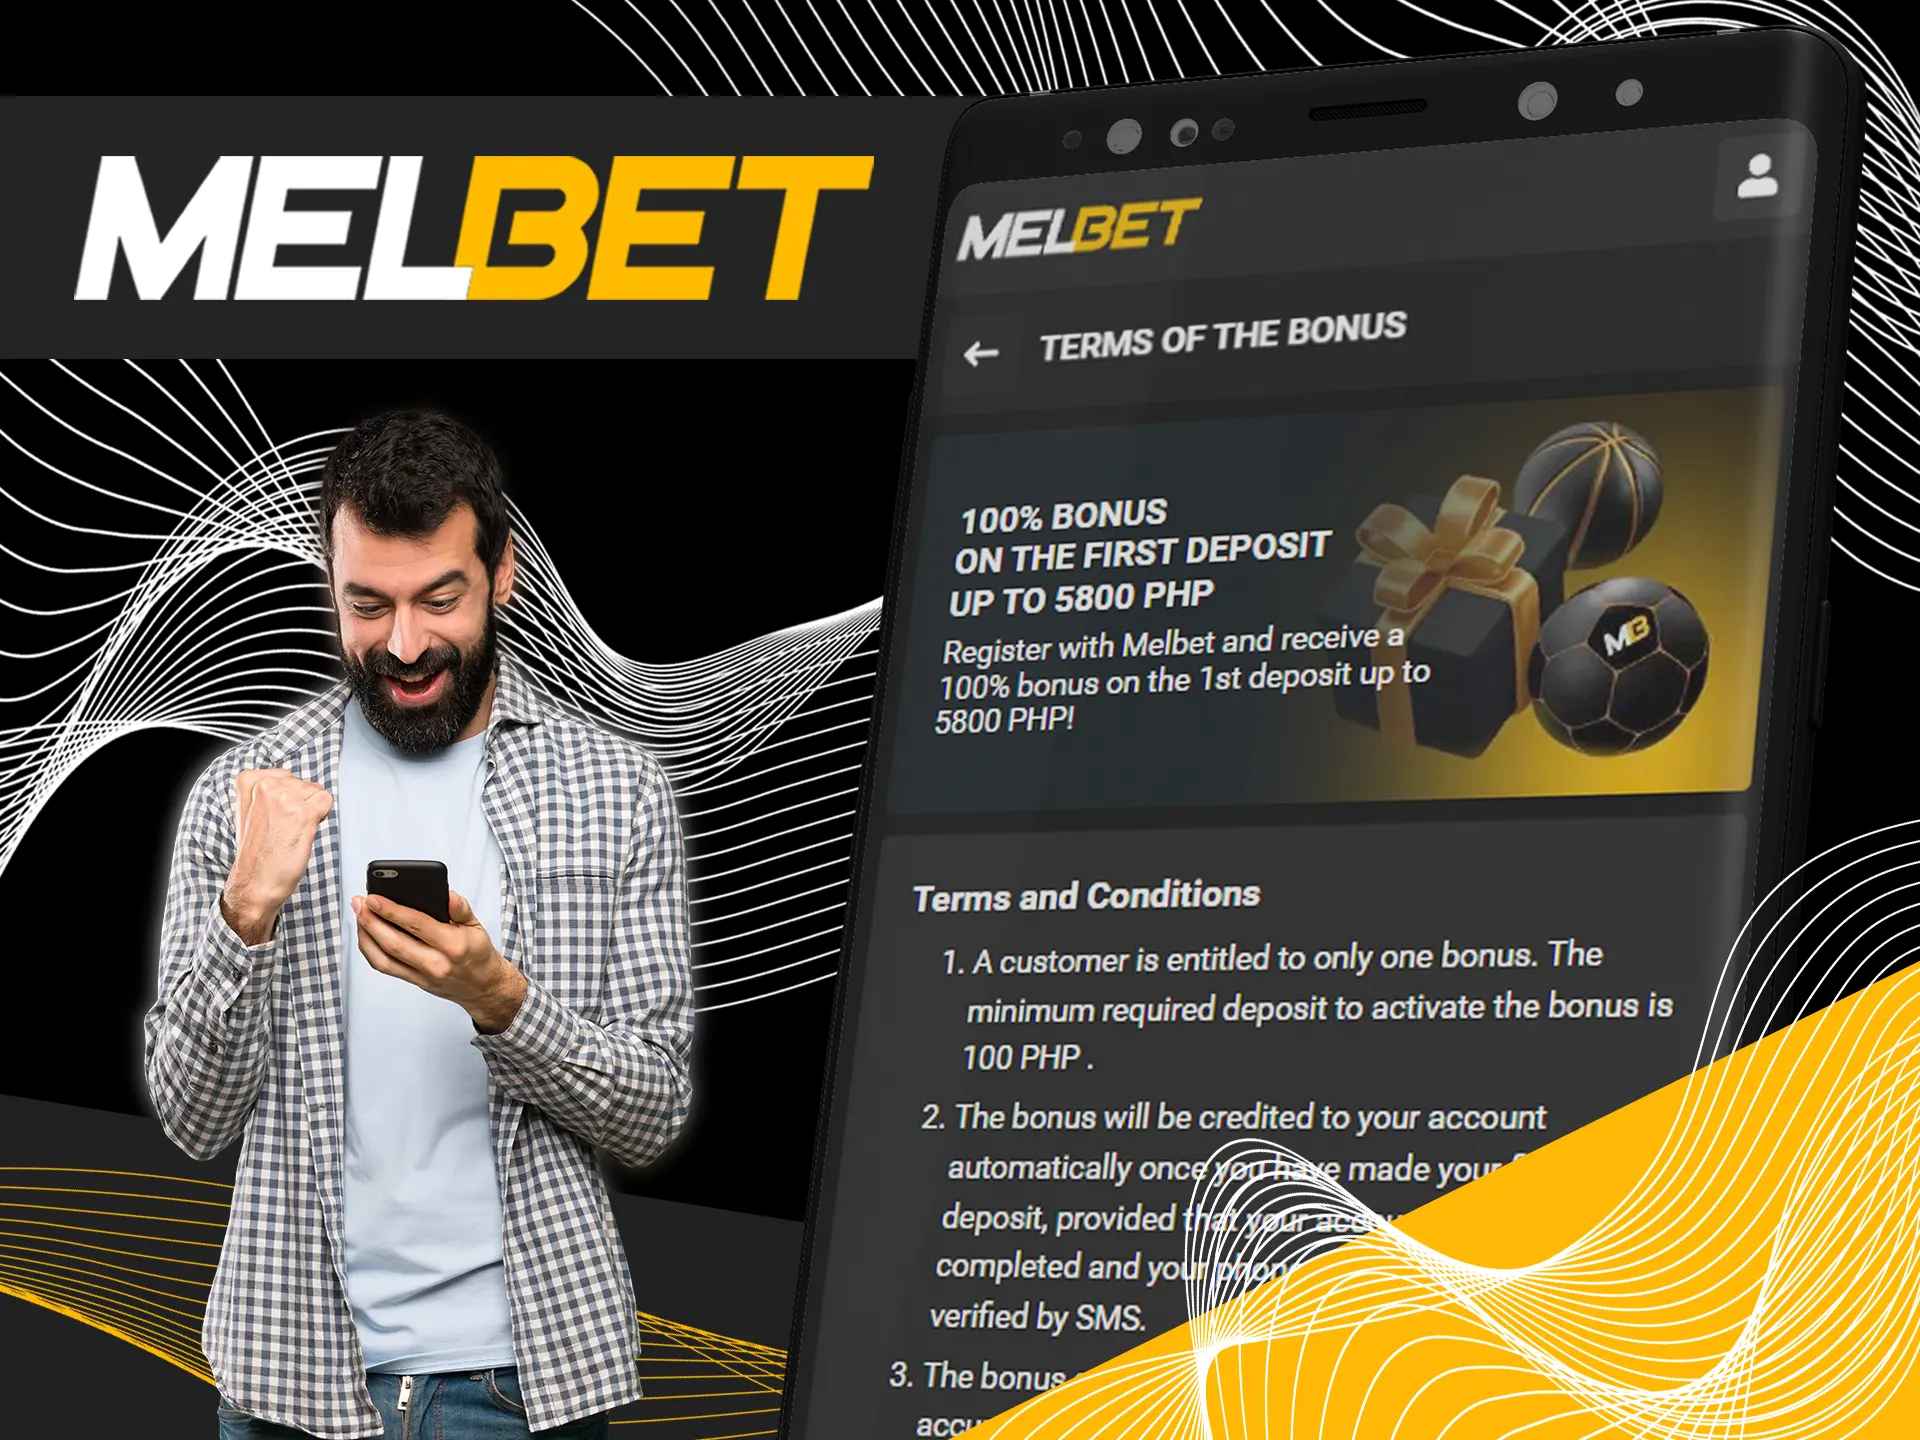 Get your welcome bonus after regsitration at Melbet.